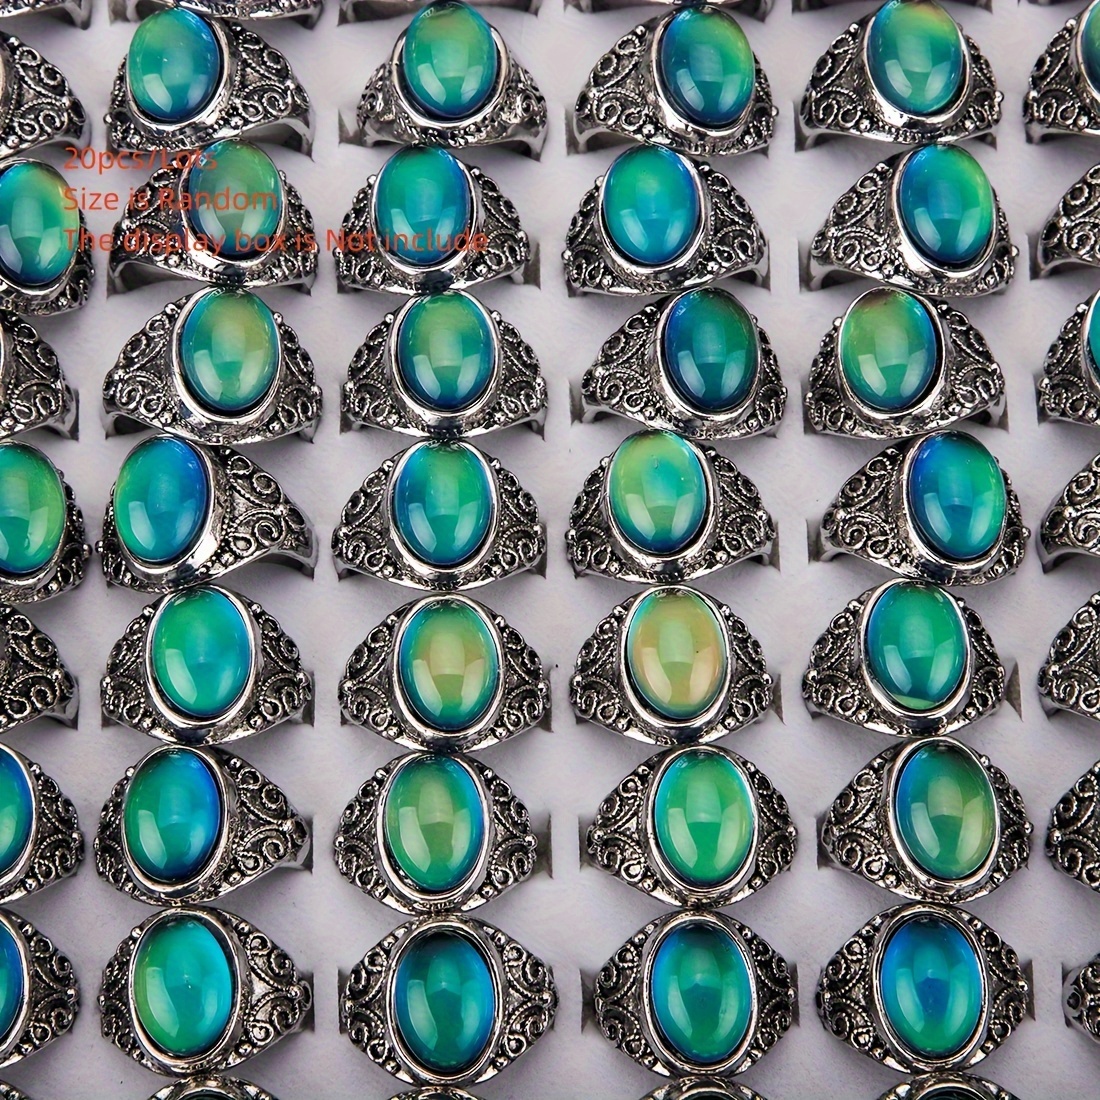 

Us Wholesale Lots 20pcs Moon Stone Color Changing Mood Ring, Fashion Jewelry Men's Women's Gift Not Include Box Size Is Random